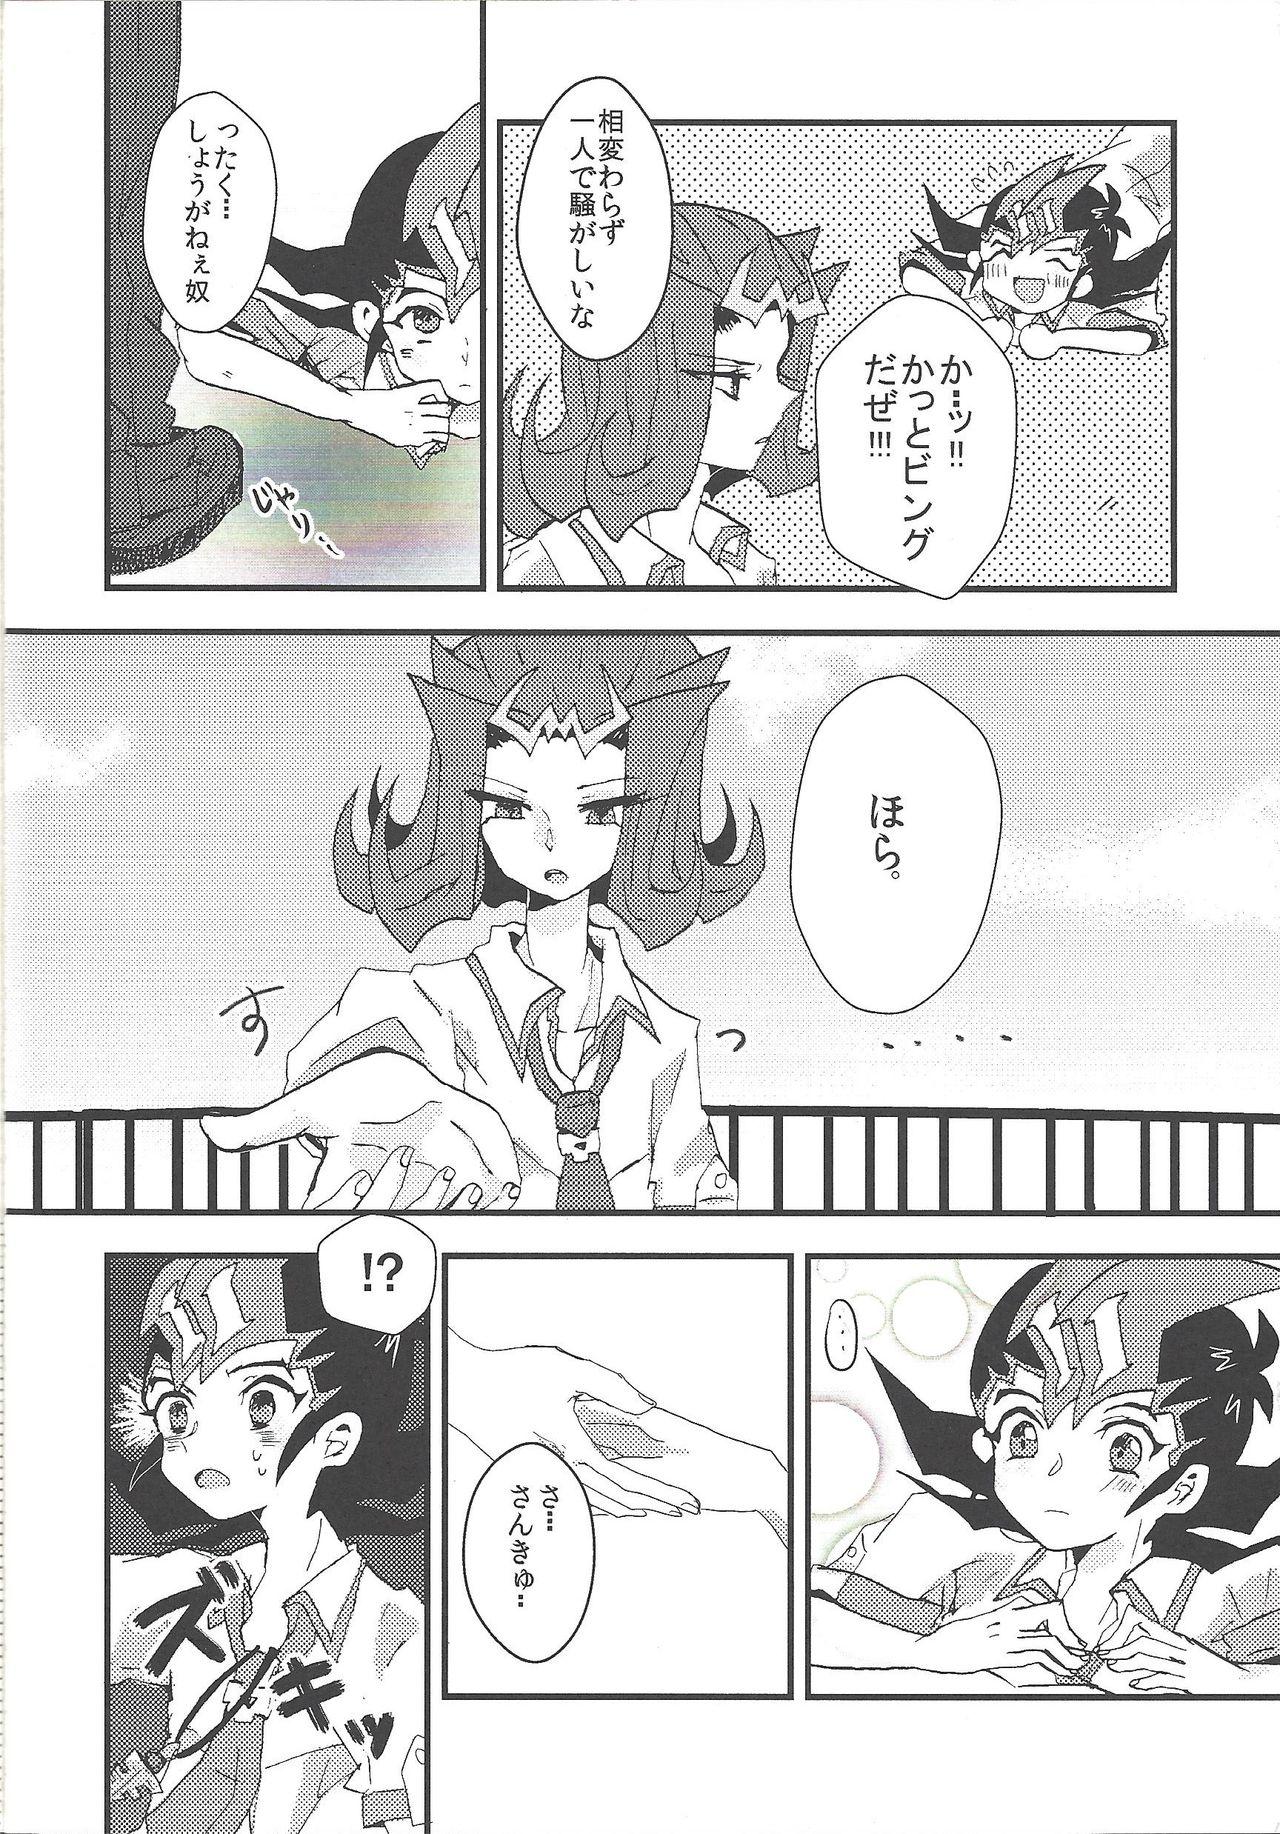 Family Jimmy Rig - Yu-gi-oh zexal Amateur - Page 5